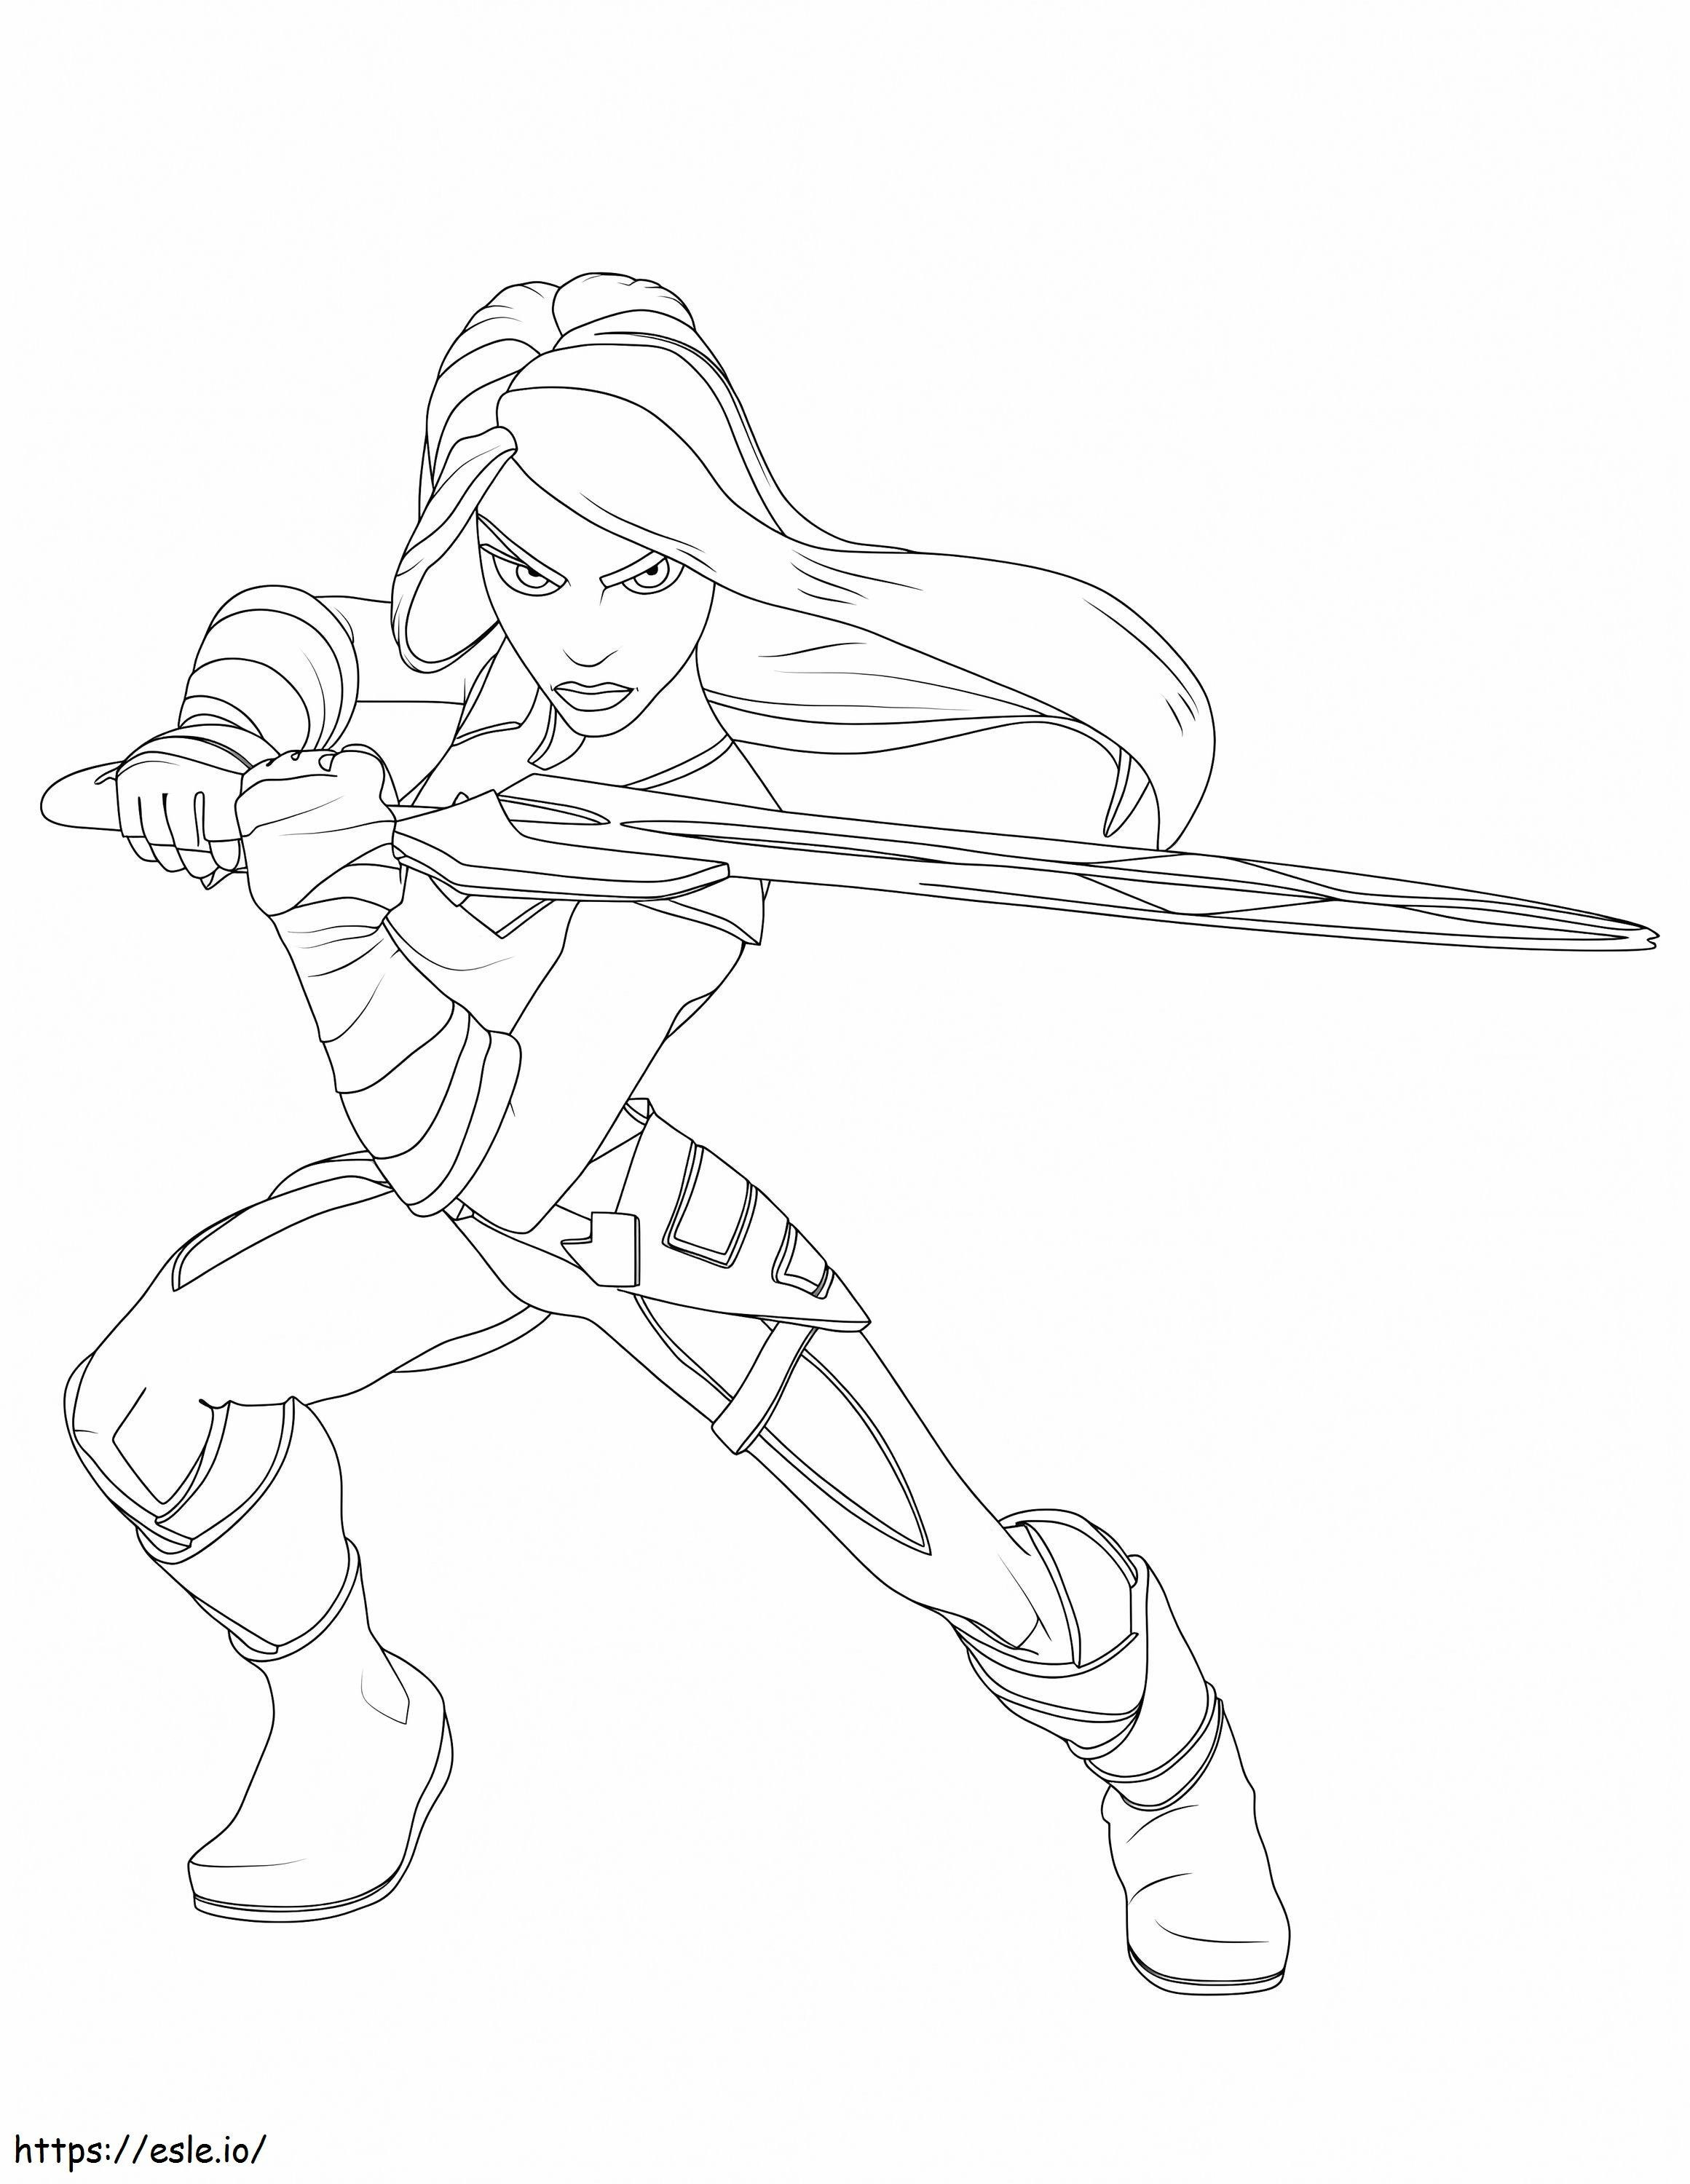 Animated Gamora coloring page